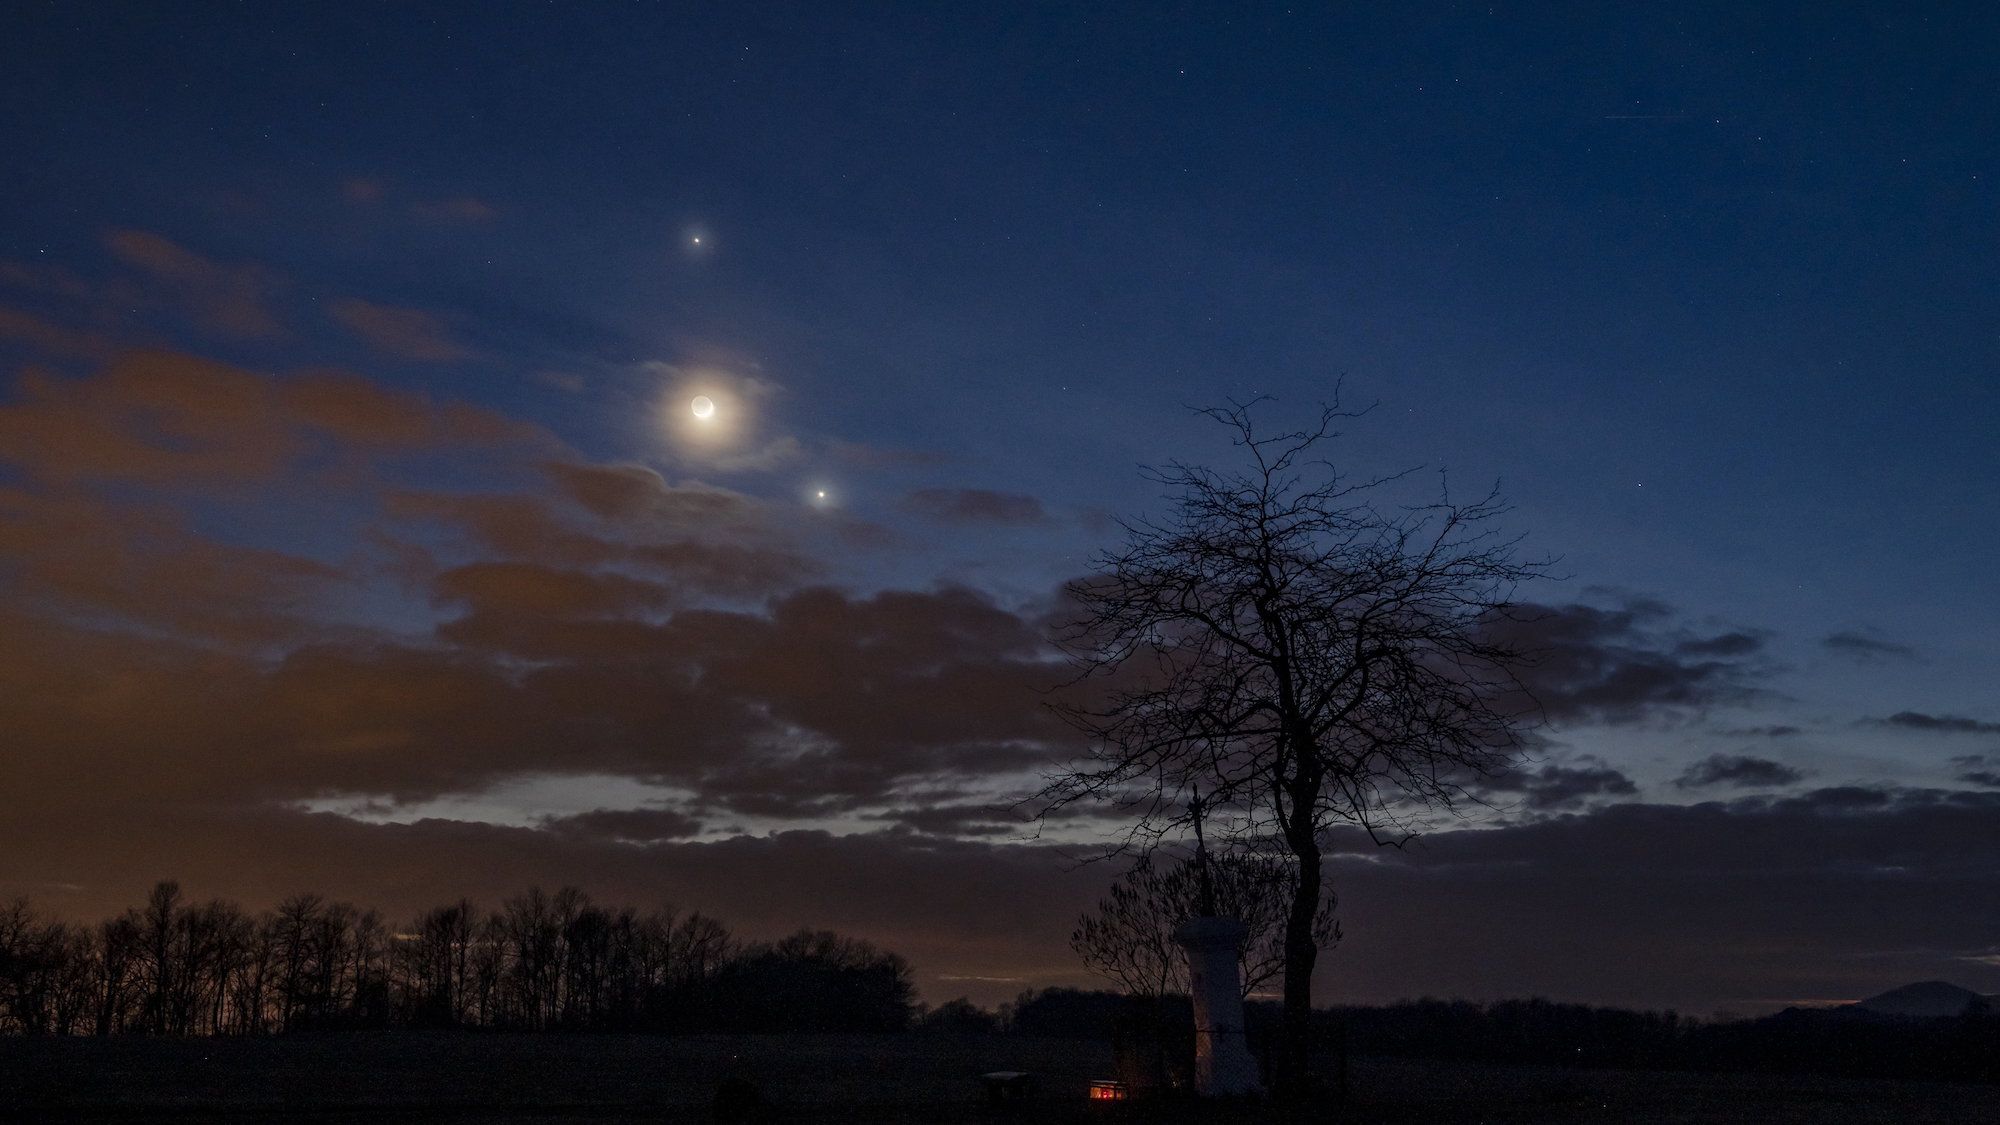 Two planets will appear to 'kiss' in the sky tonight